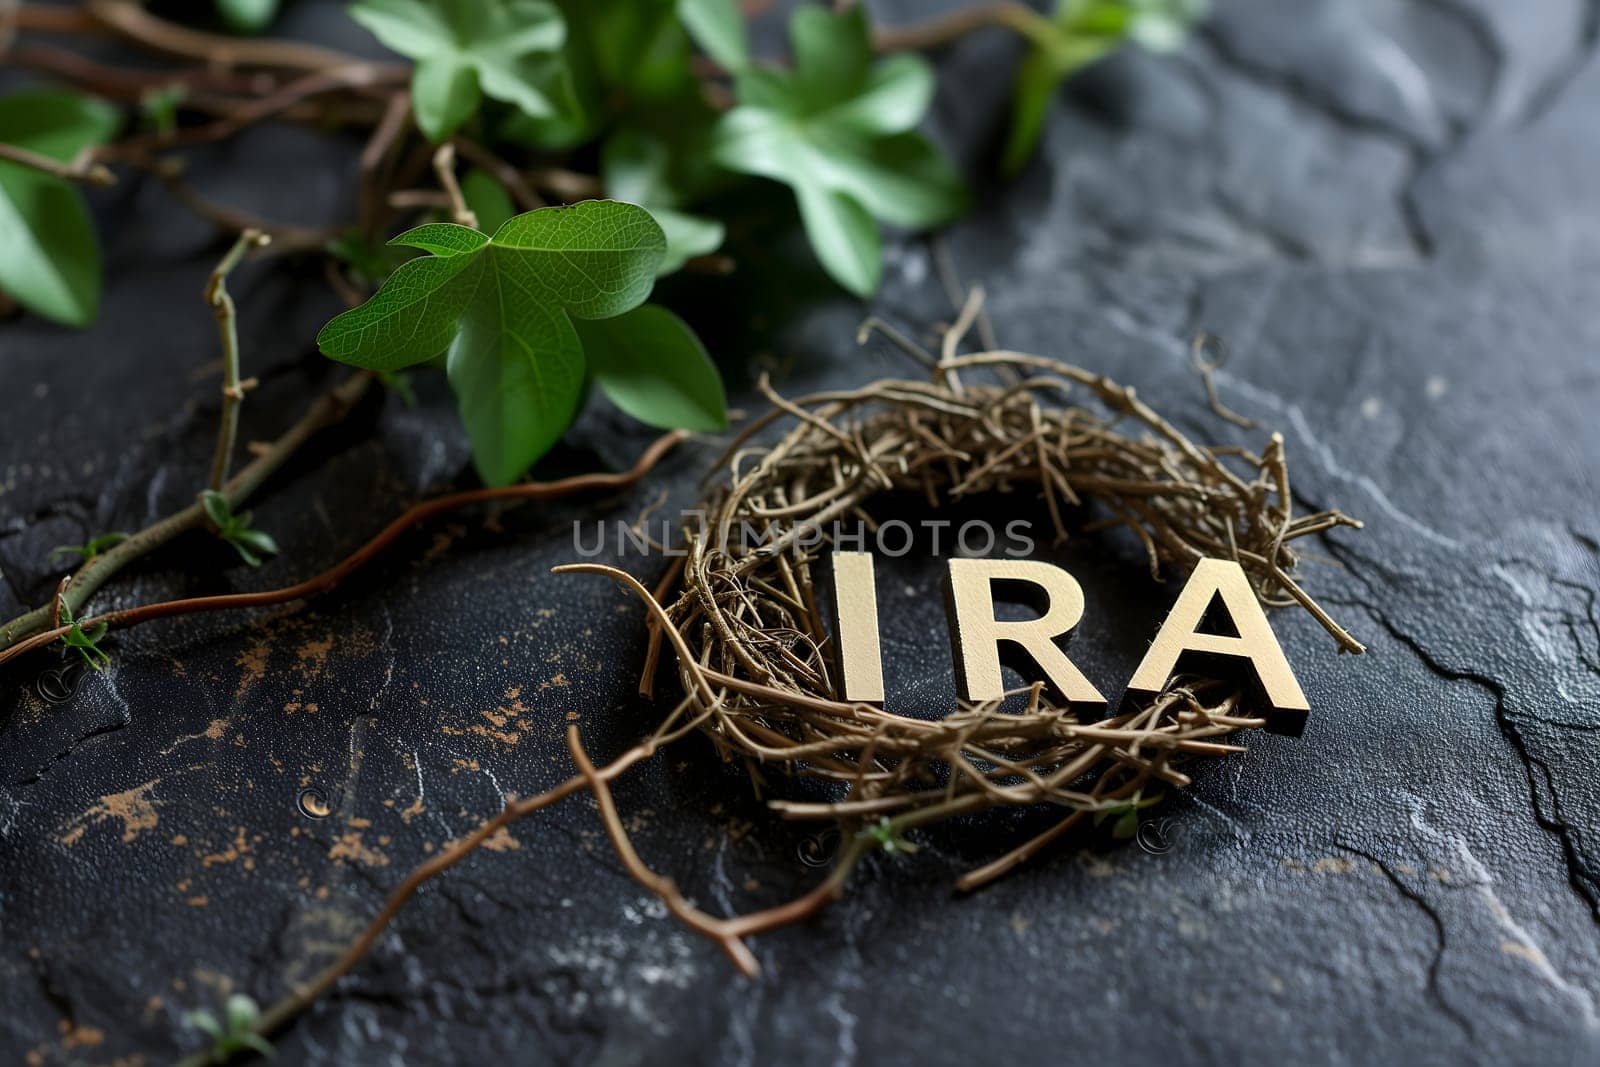 Word IRA in a nest on black slate background. Neural network generated image. Not based on any actual person or scene.